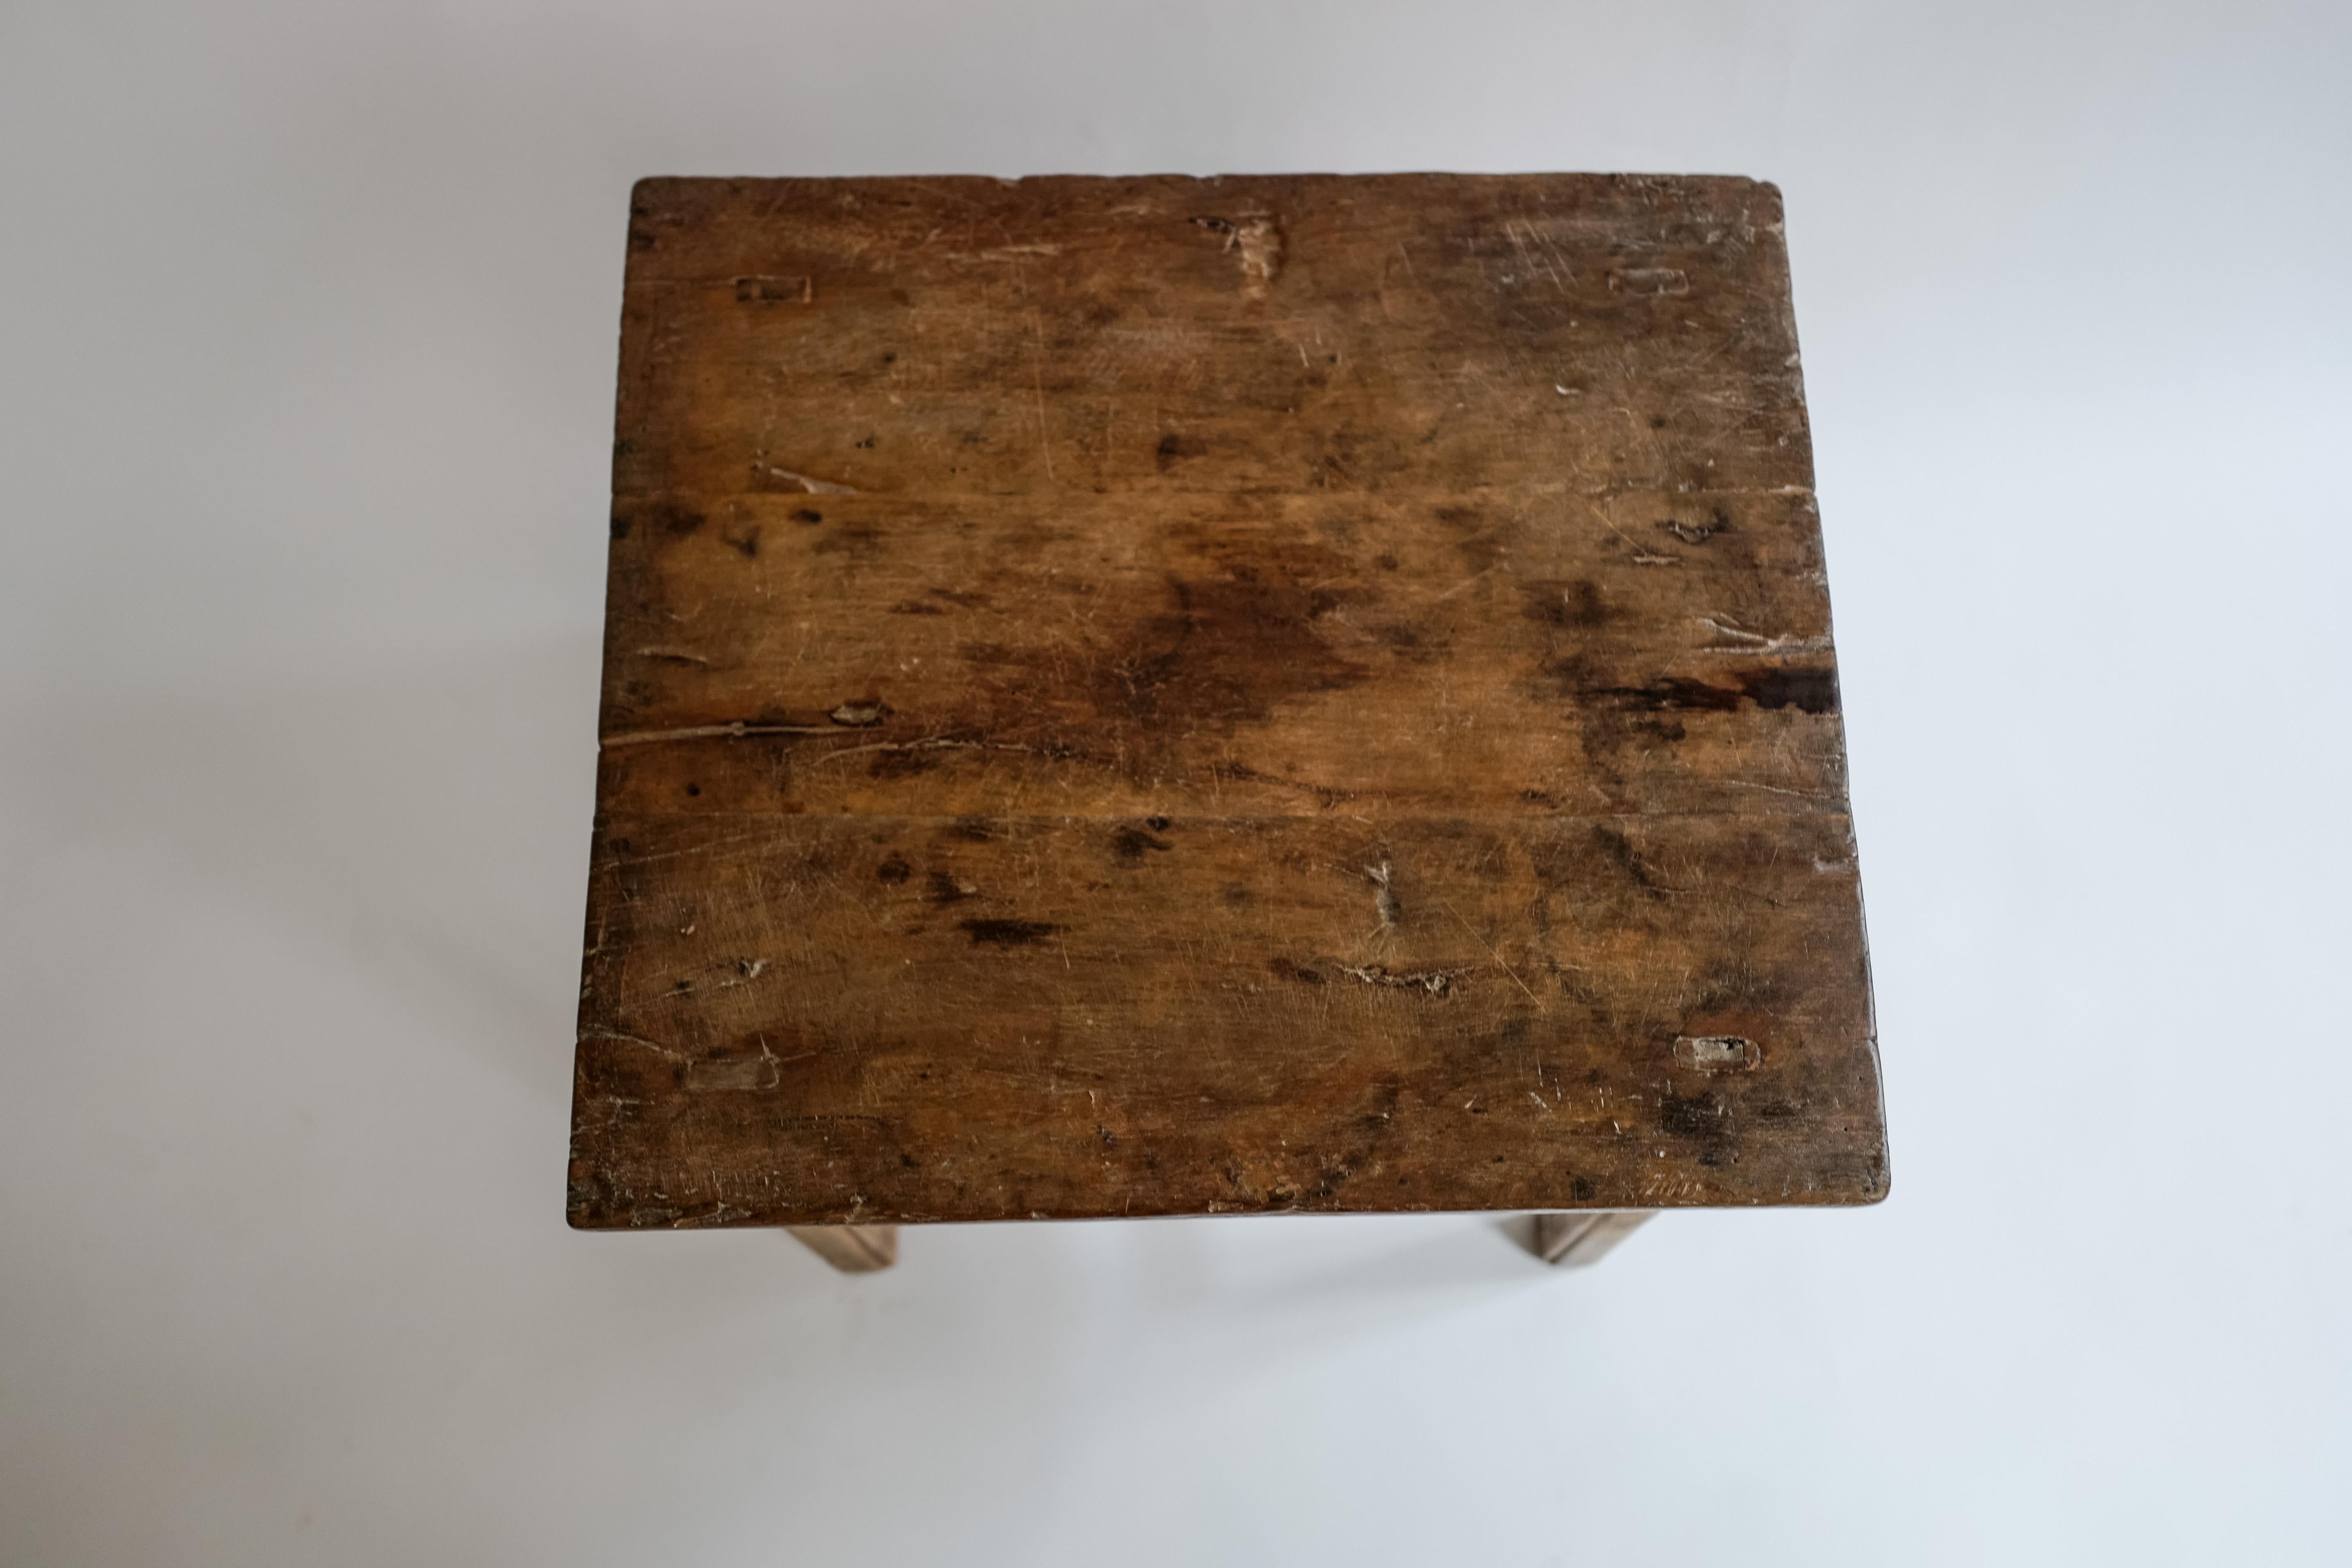 A handcrafted elm wood side table made in China circa 19th century. Solid single piece of wood used for the top. Beautiful rustic feel.